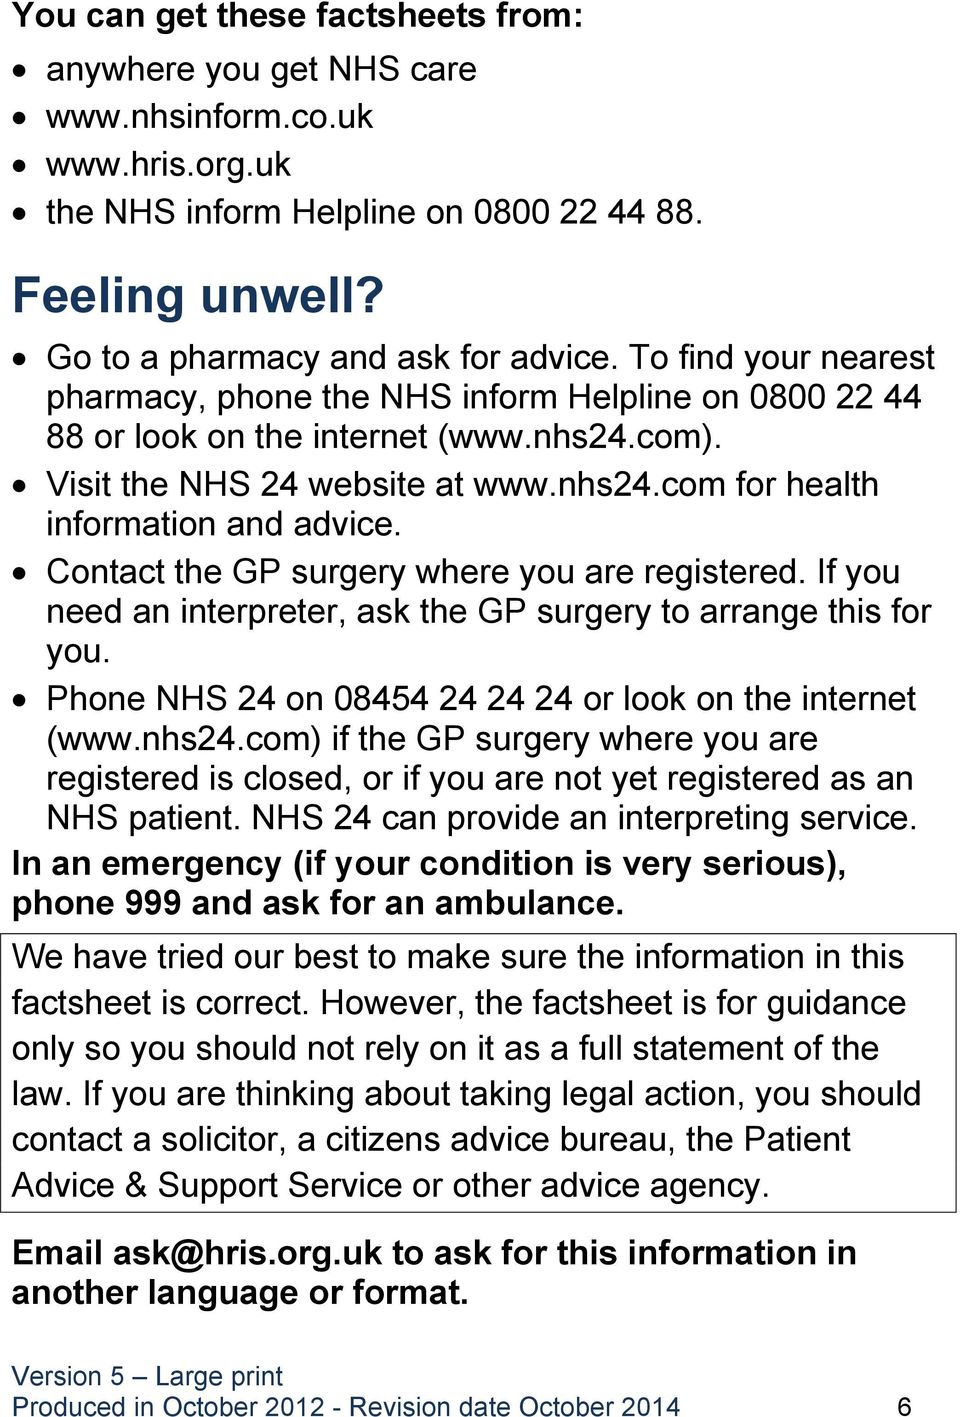 Contact the GP surgery where you are registered. If you need an interpreter, ask the GP surgery to arrange this for you. Phone NHS 24 on 08454 24 24 24 or look on the internet (www.nhs24.